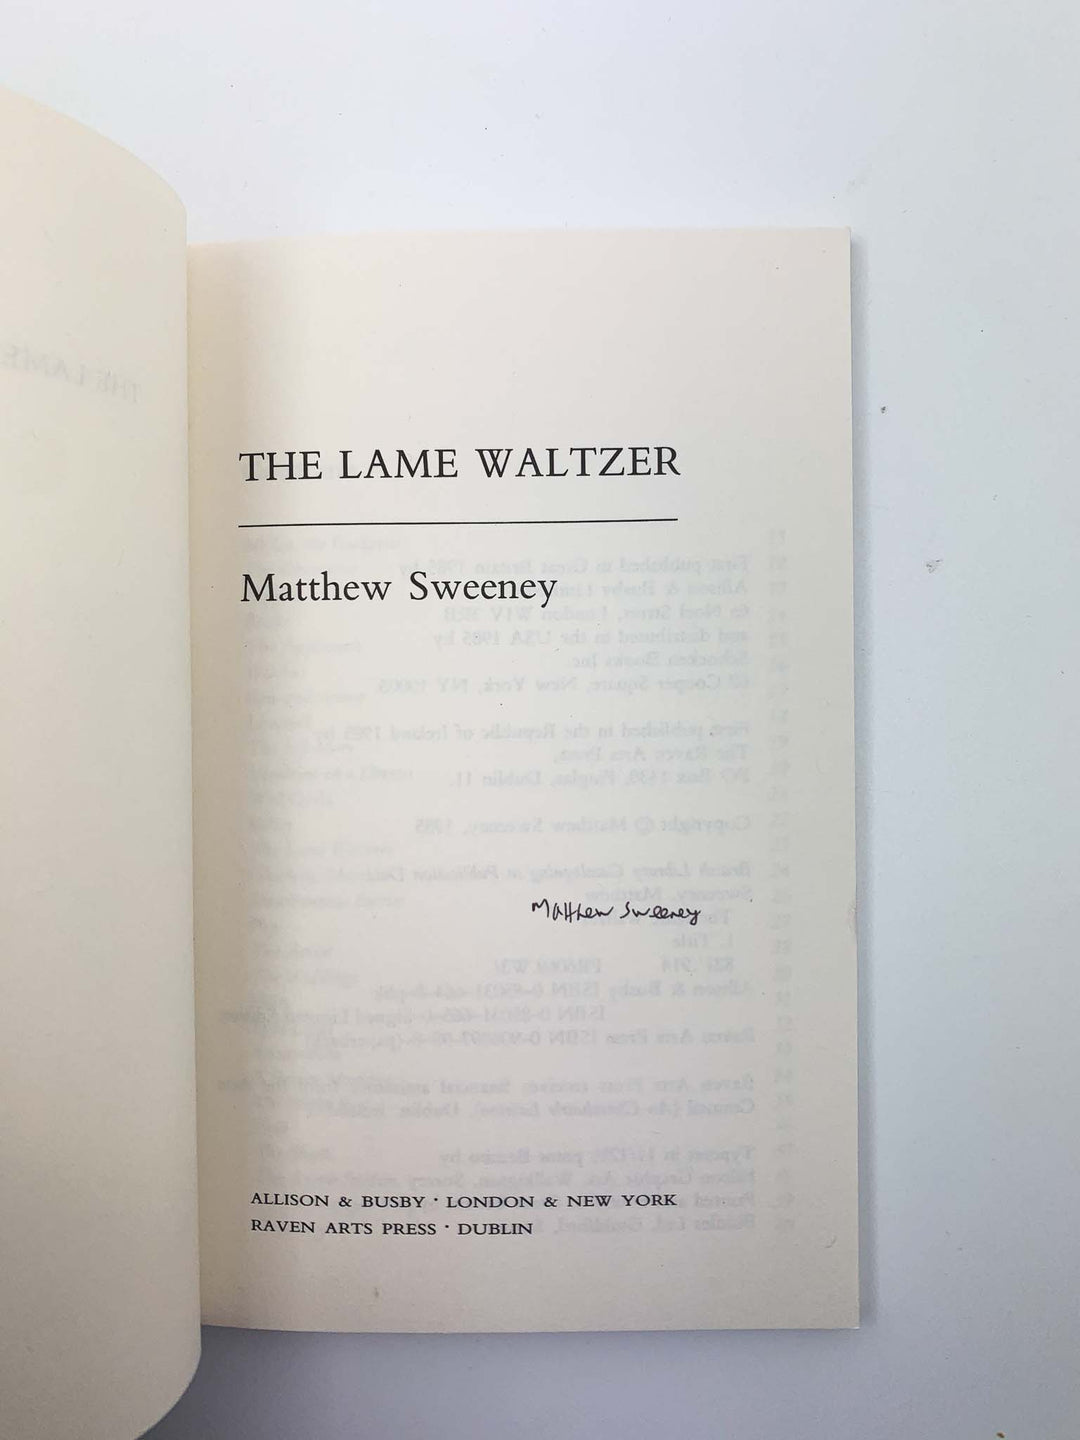 Sweeney, Matthew - The Lame Waltzer - SIGNED | back cover